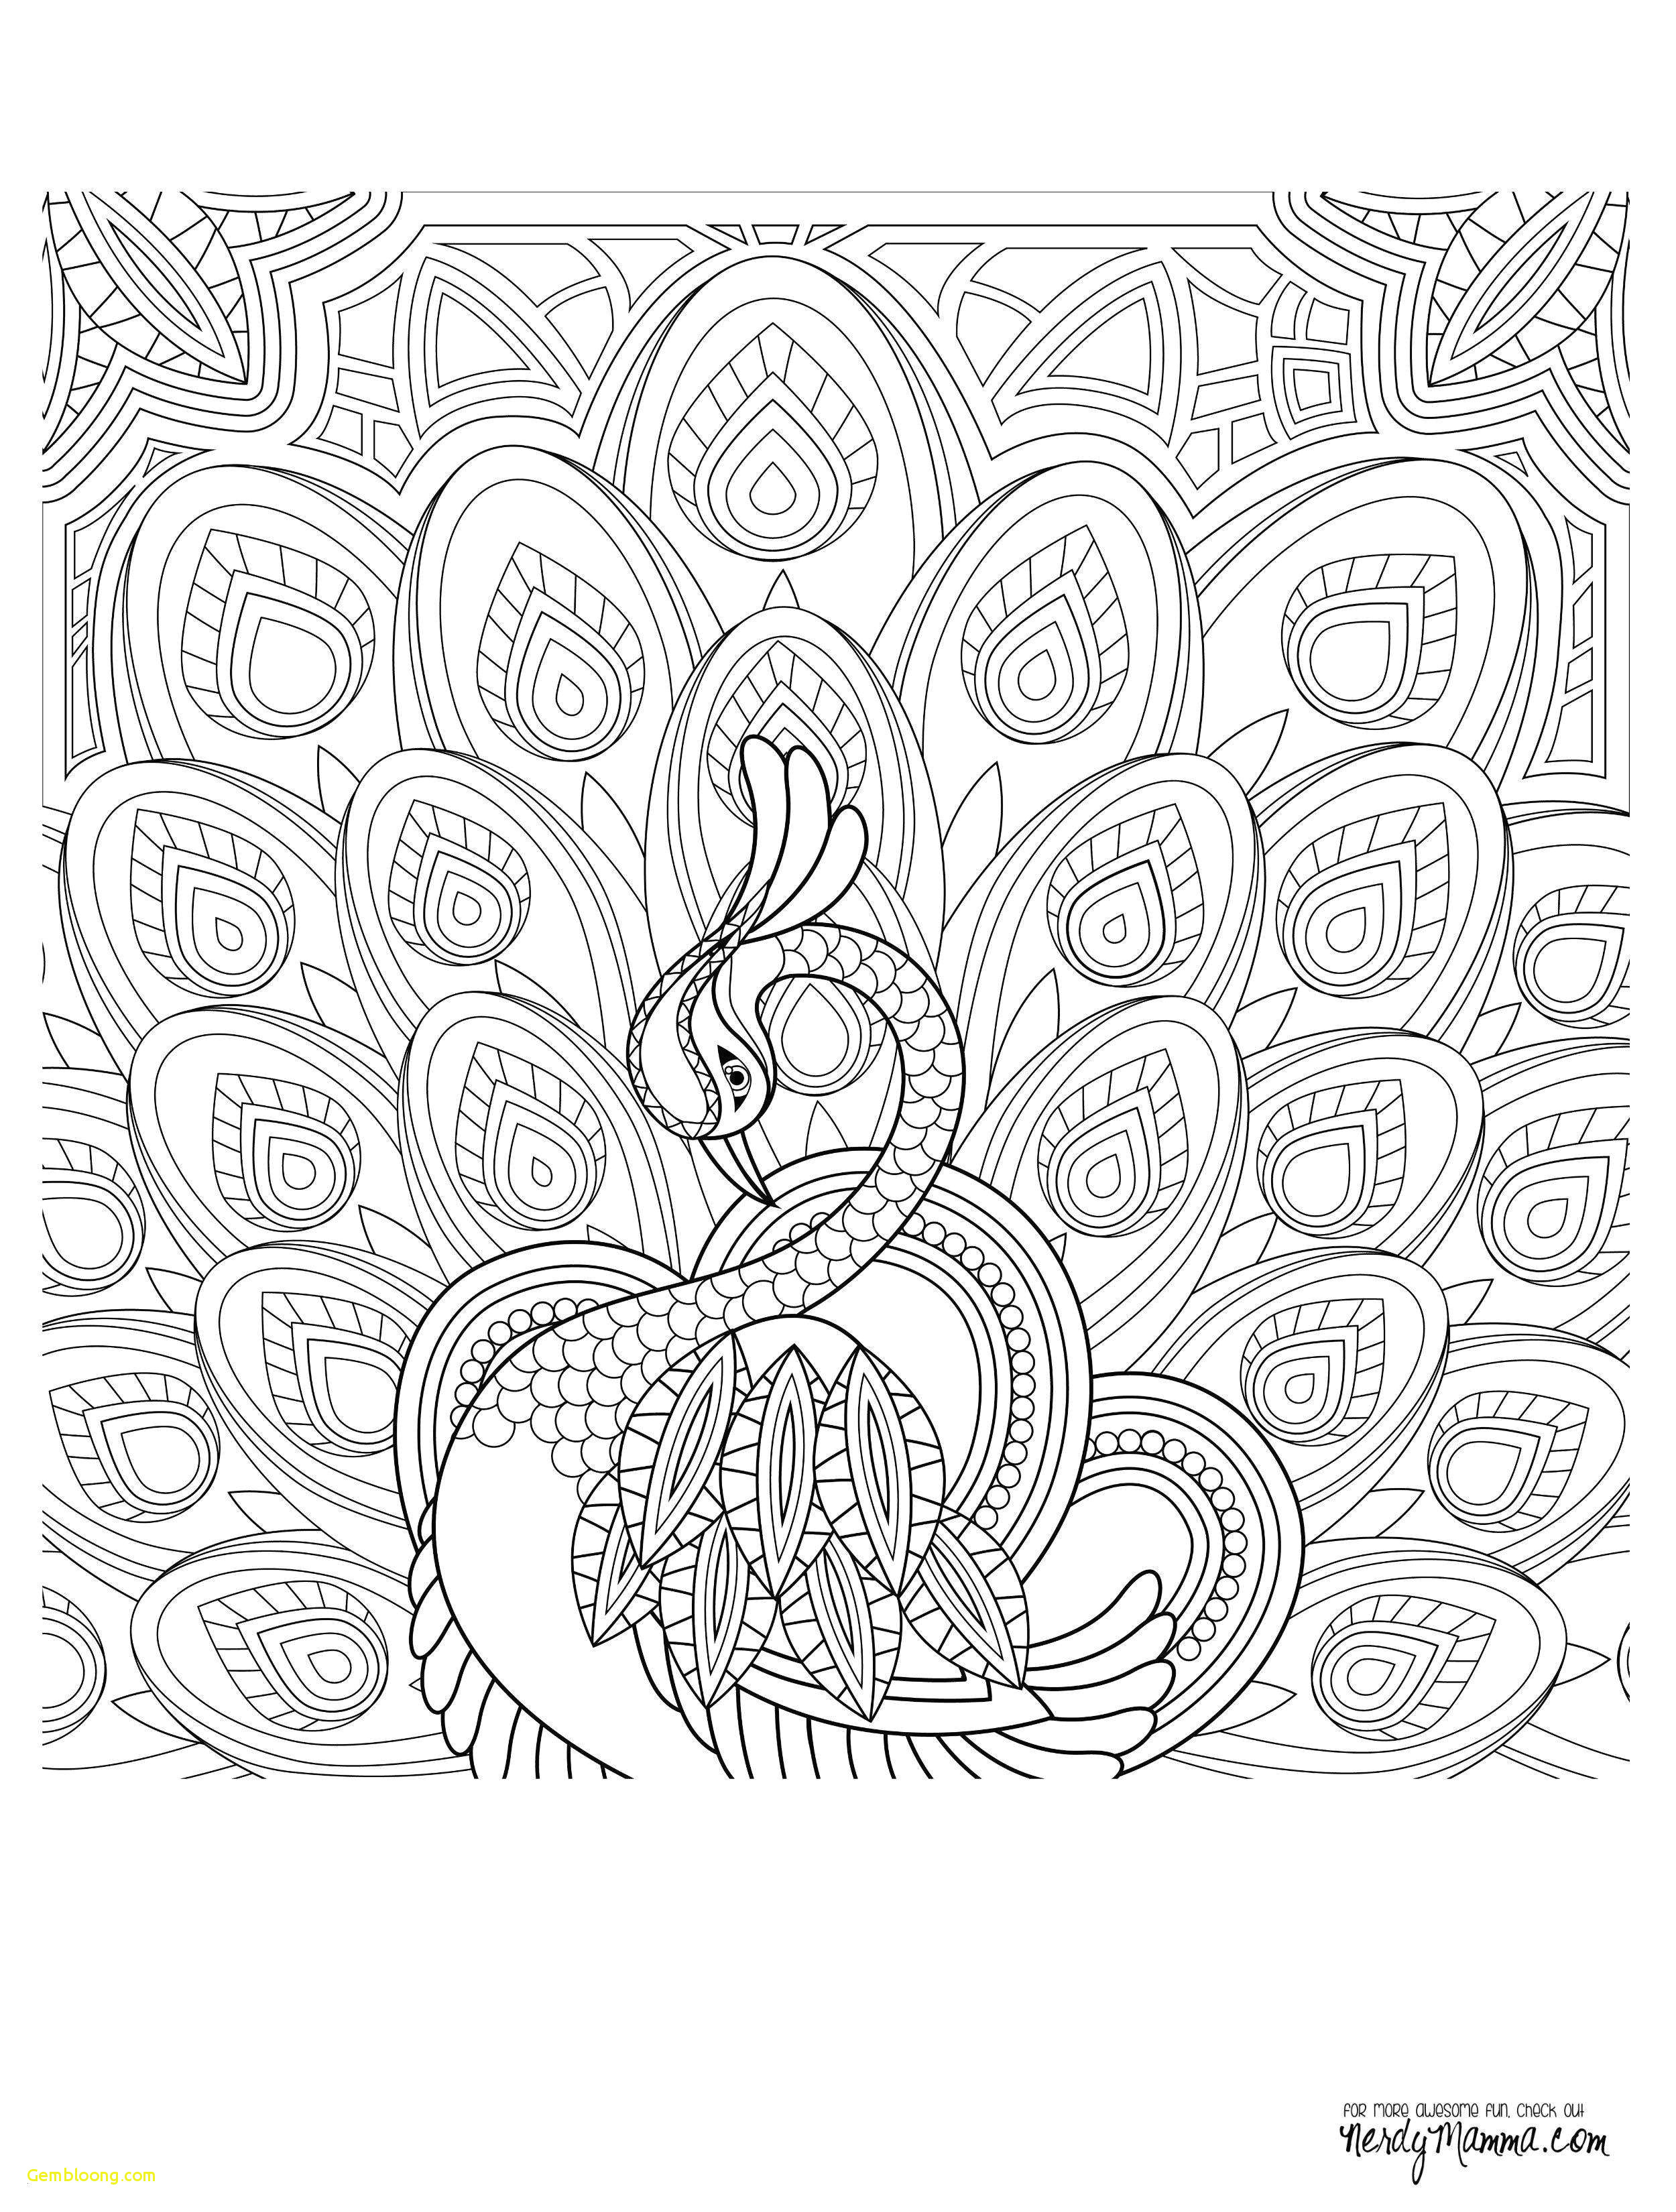 colouring in new new colouring family c3 82 c2 a0 0d free coloring pages fun time 20 princess drawings to color free coloring sheets from 8 year old